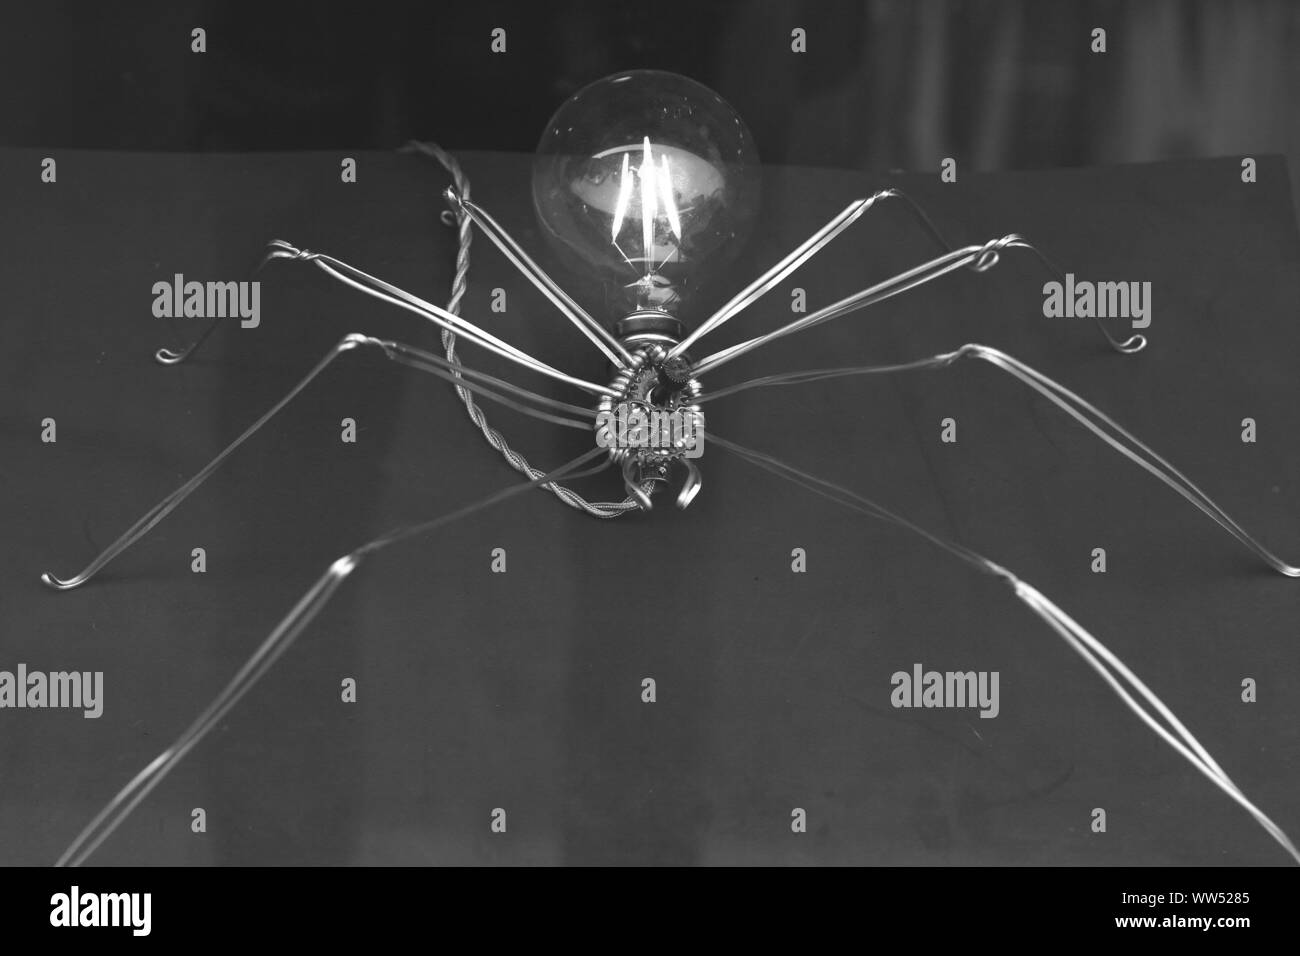 A spider from wires and a light bulb Stock Photo